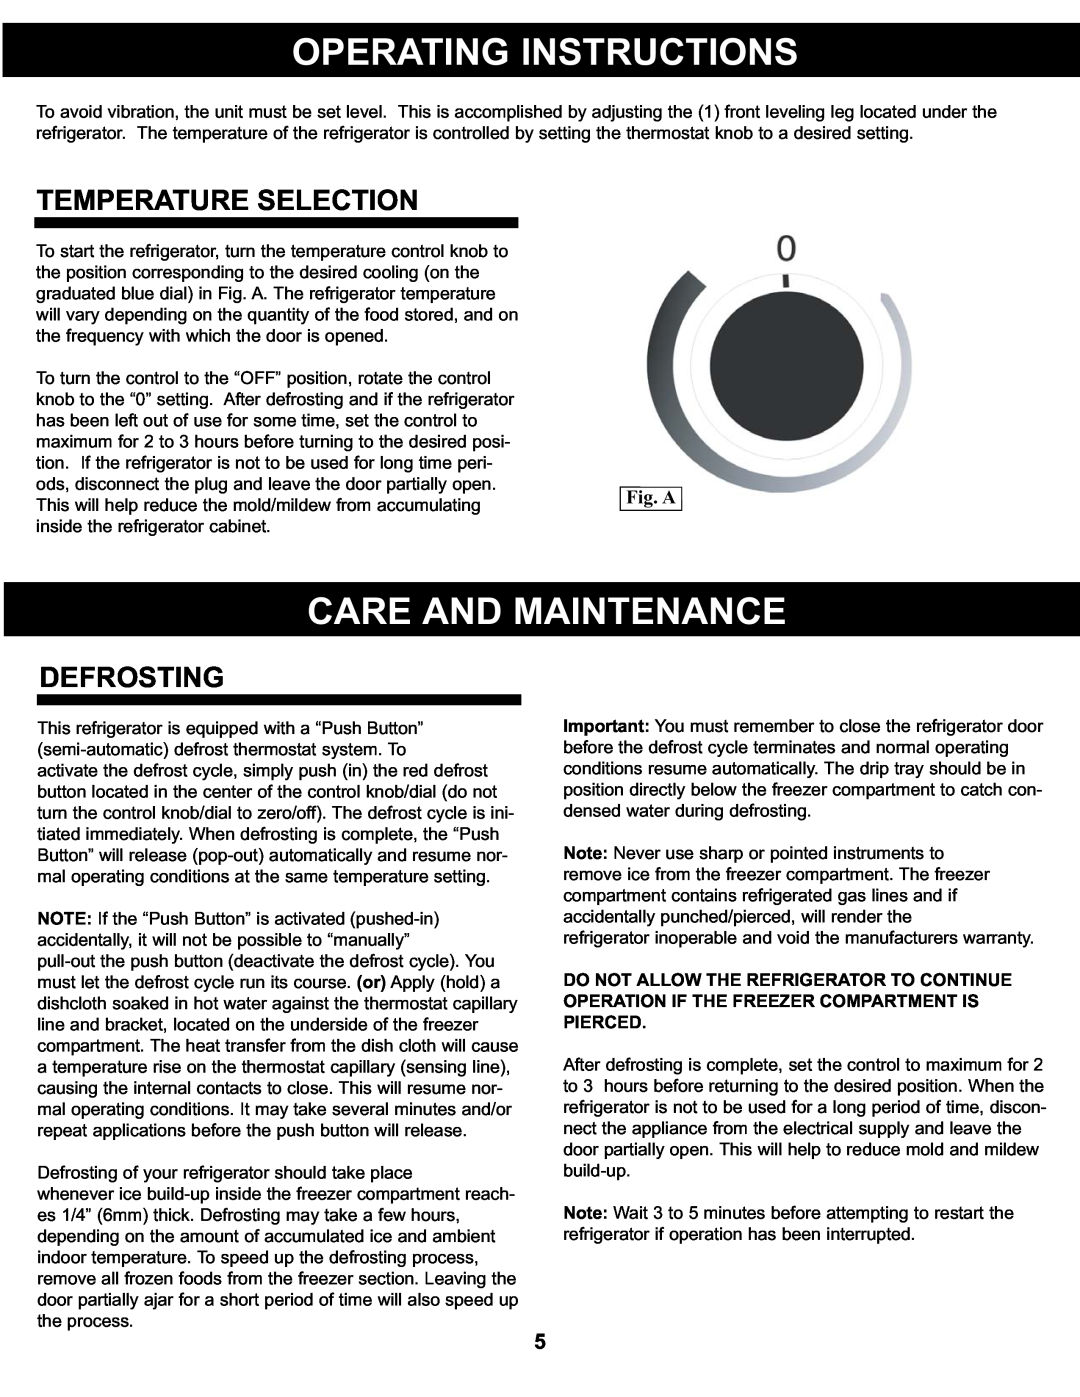 Danby DCR122BLDD manual Operating Instructions, Care And Maintenance, Temperature Selection, Defrosting, Fig. A 